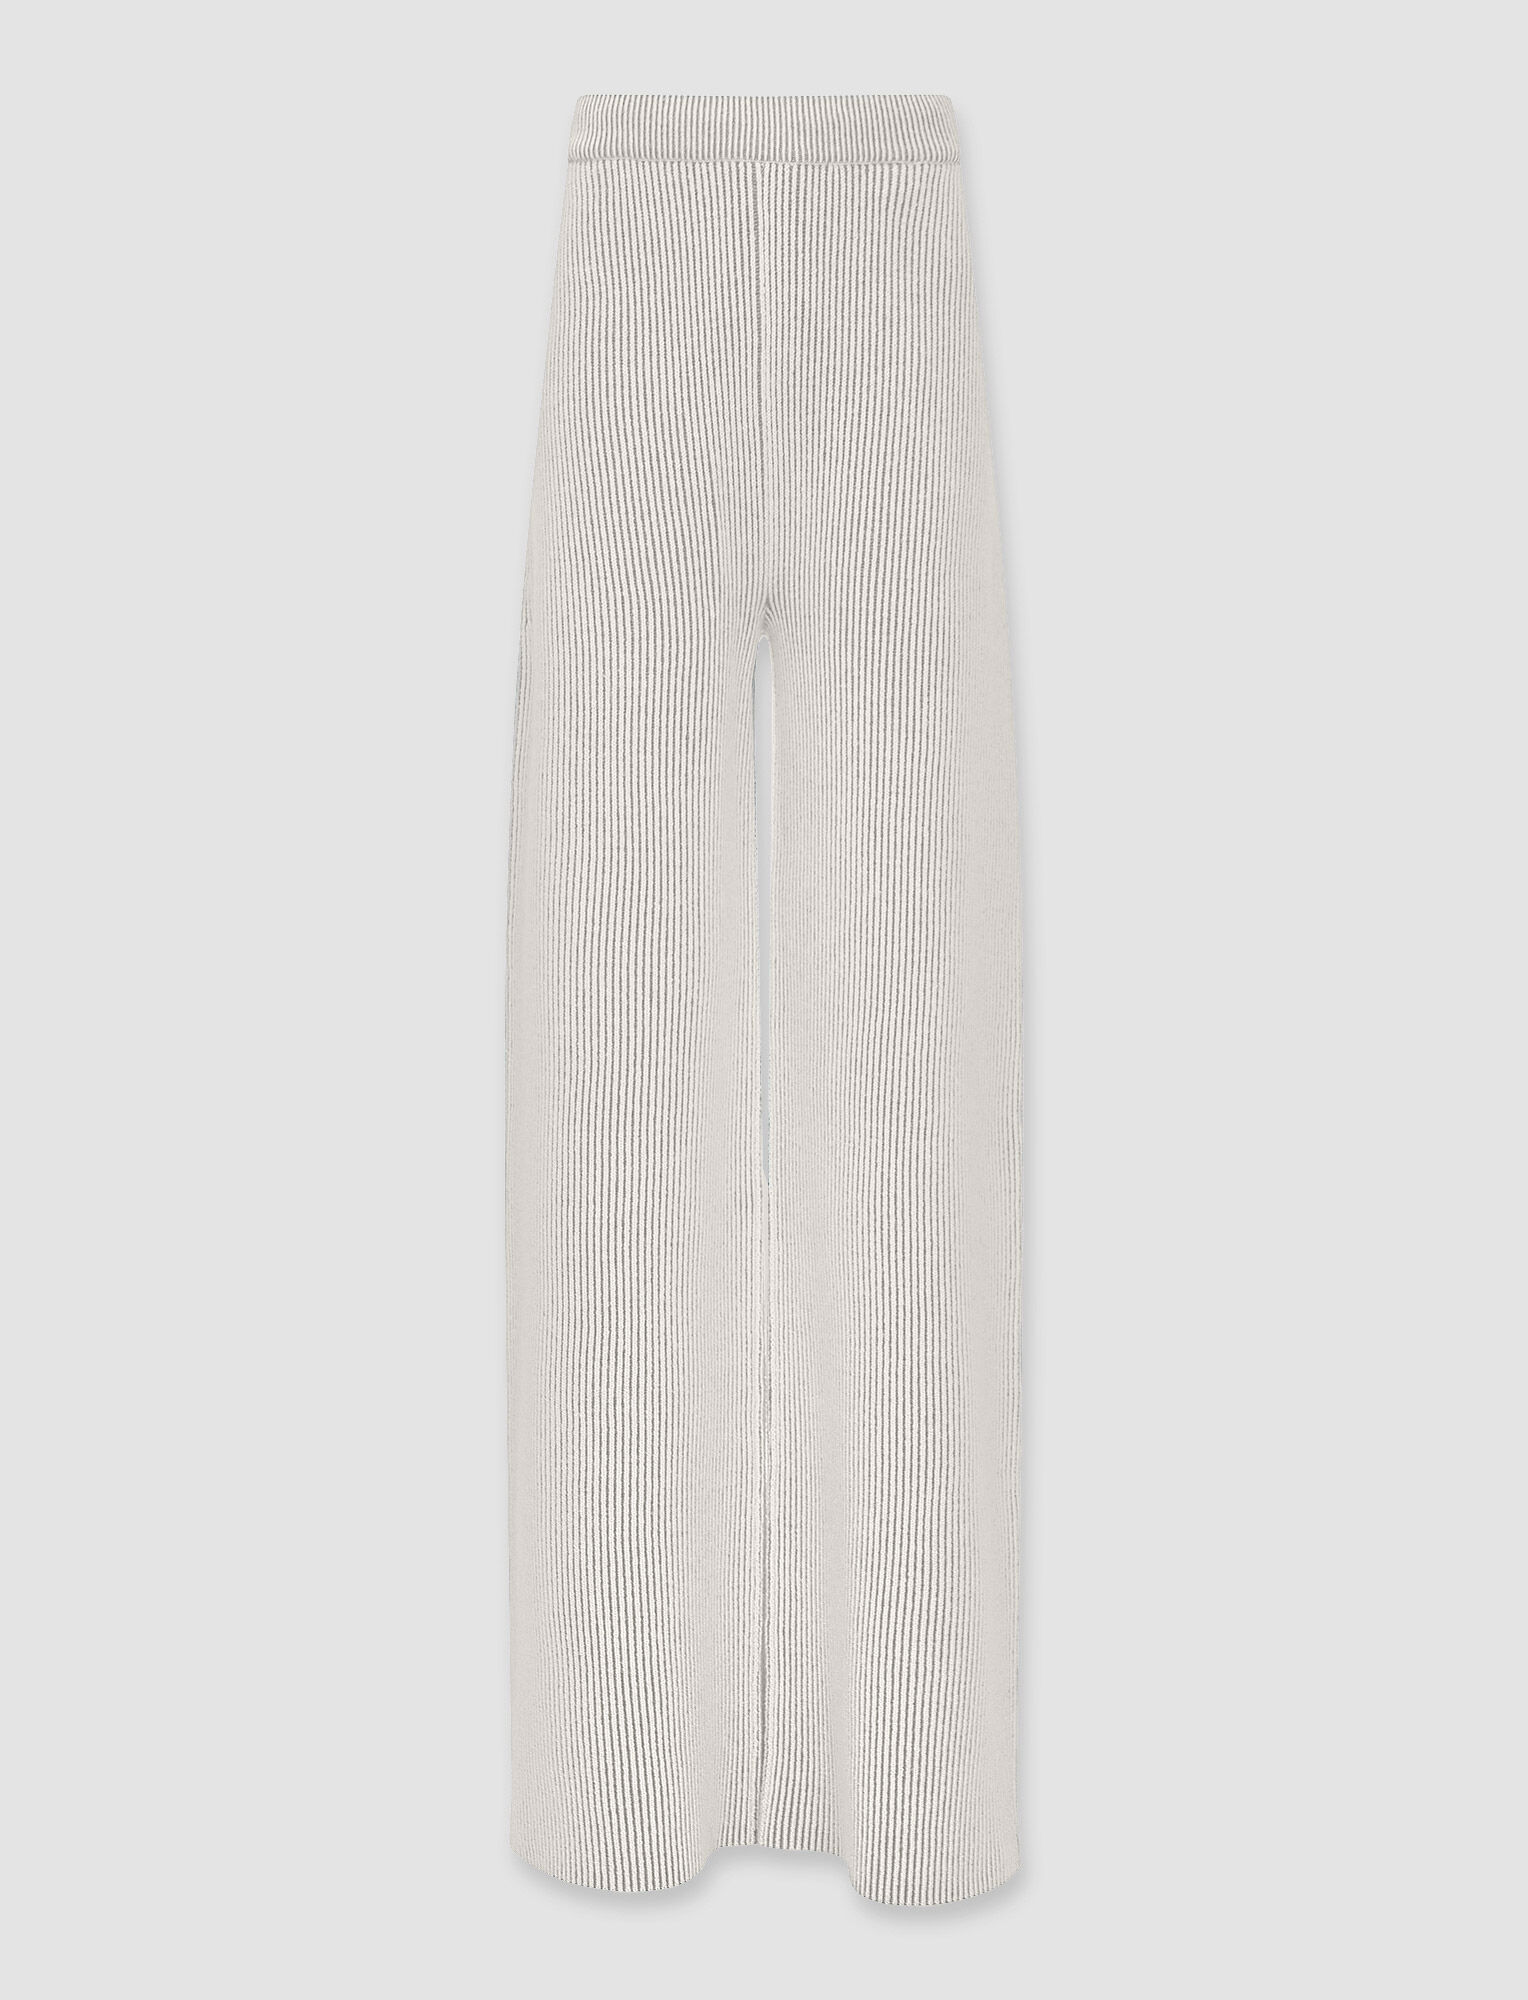 Buy Off White Trousers  Pants for Women by RIVI Online  Ajiocom